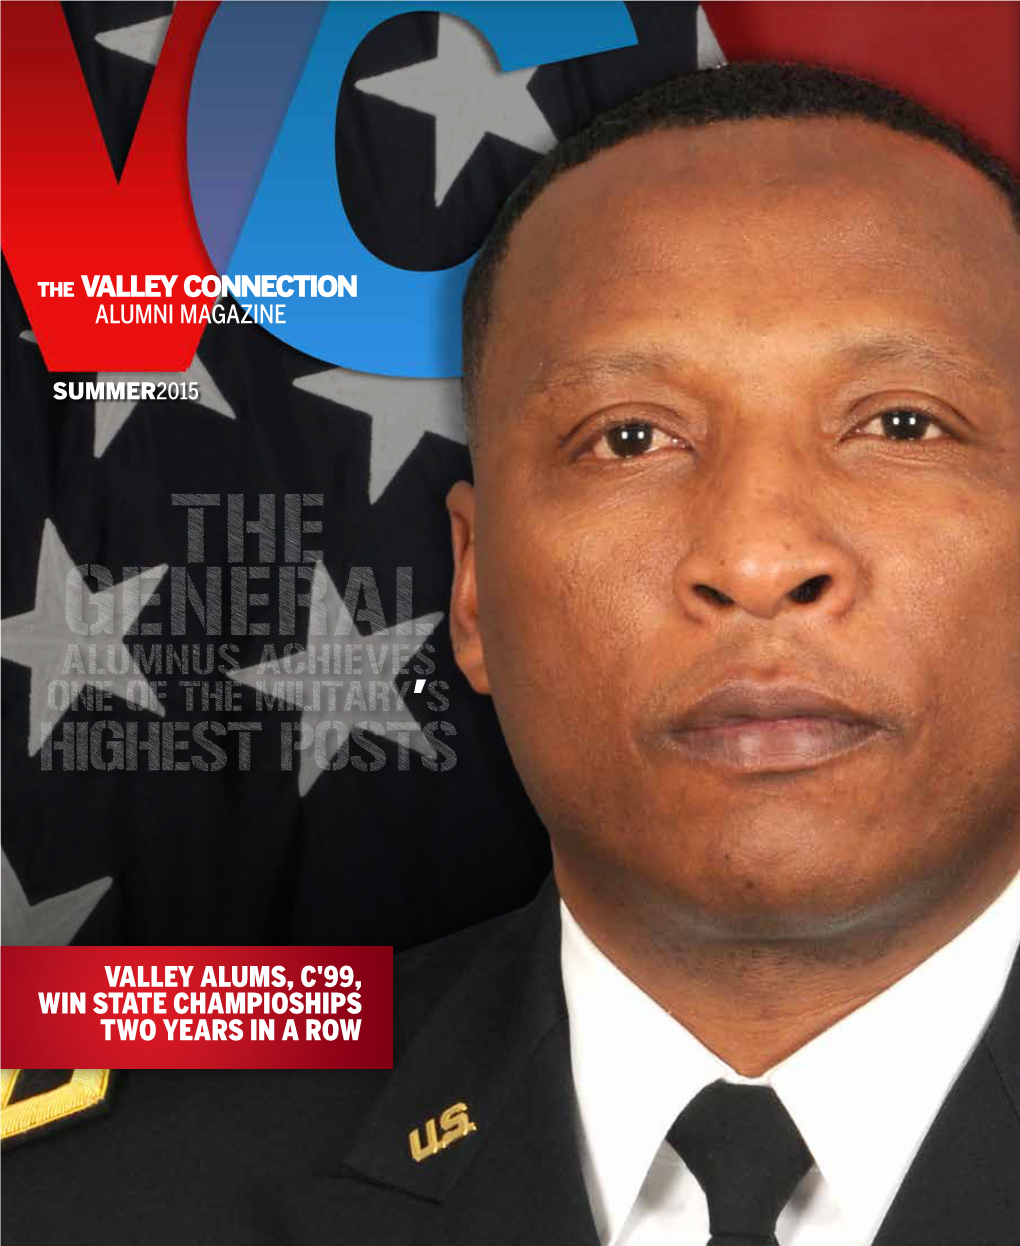 The General Alumnus Achieves One of the Military’S Highest Posts